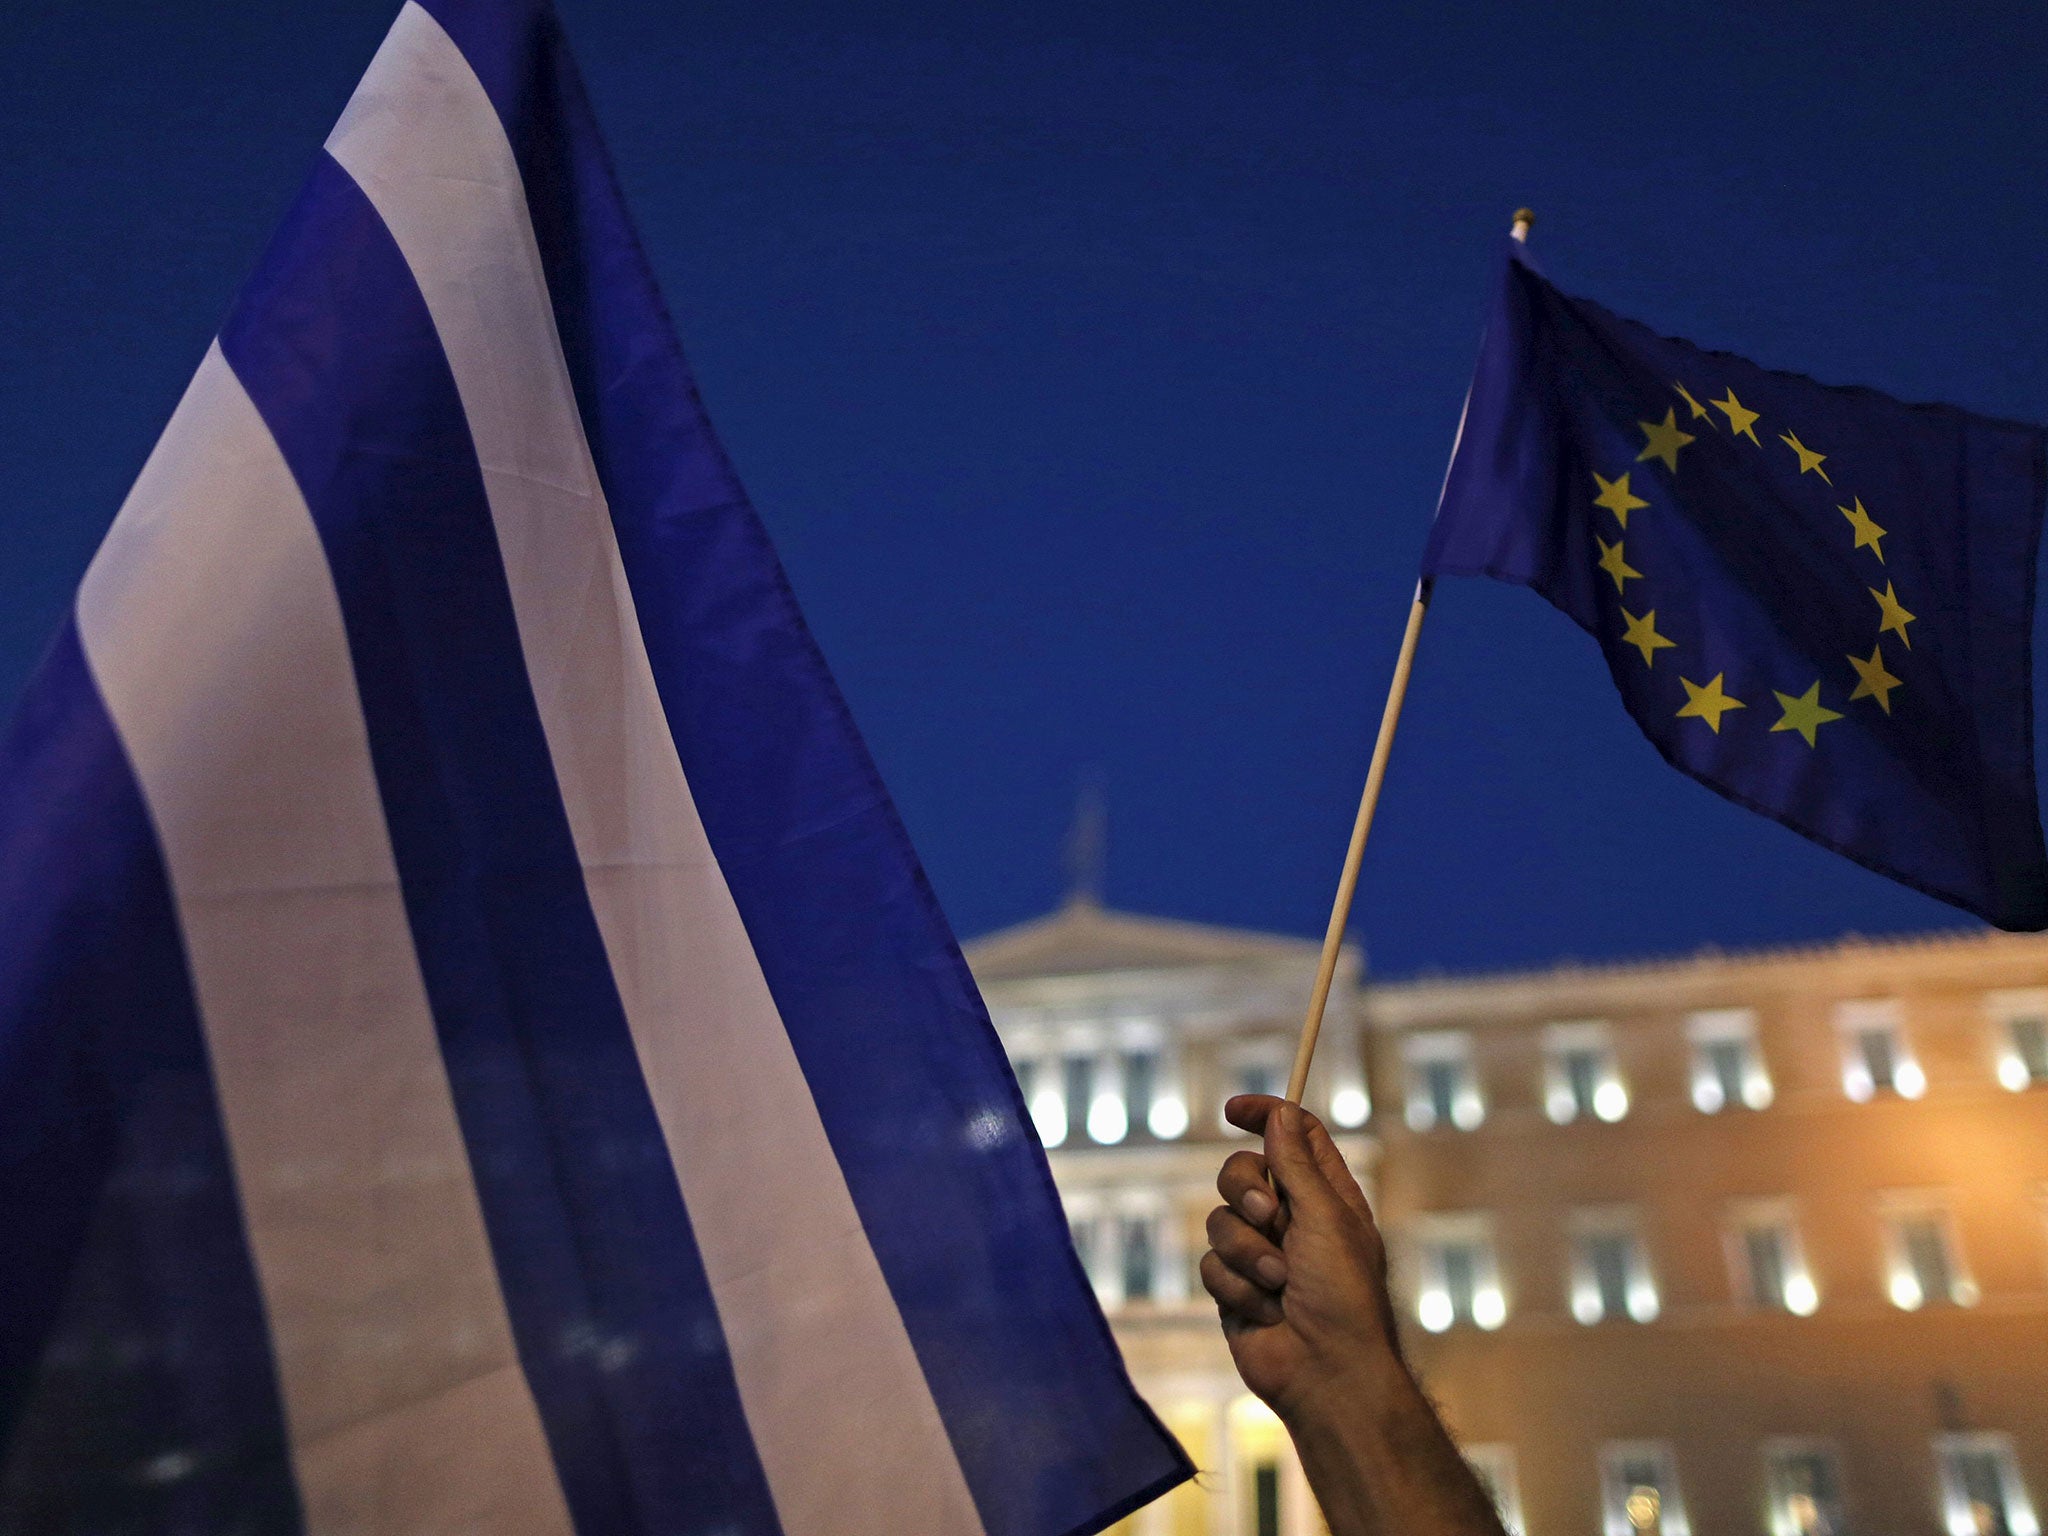 Protesters hold European Union and Greek flags during a Pro-Euro rally in front of the parliament building in Athens